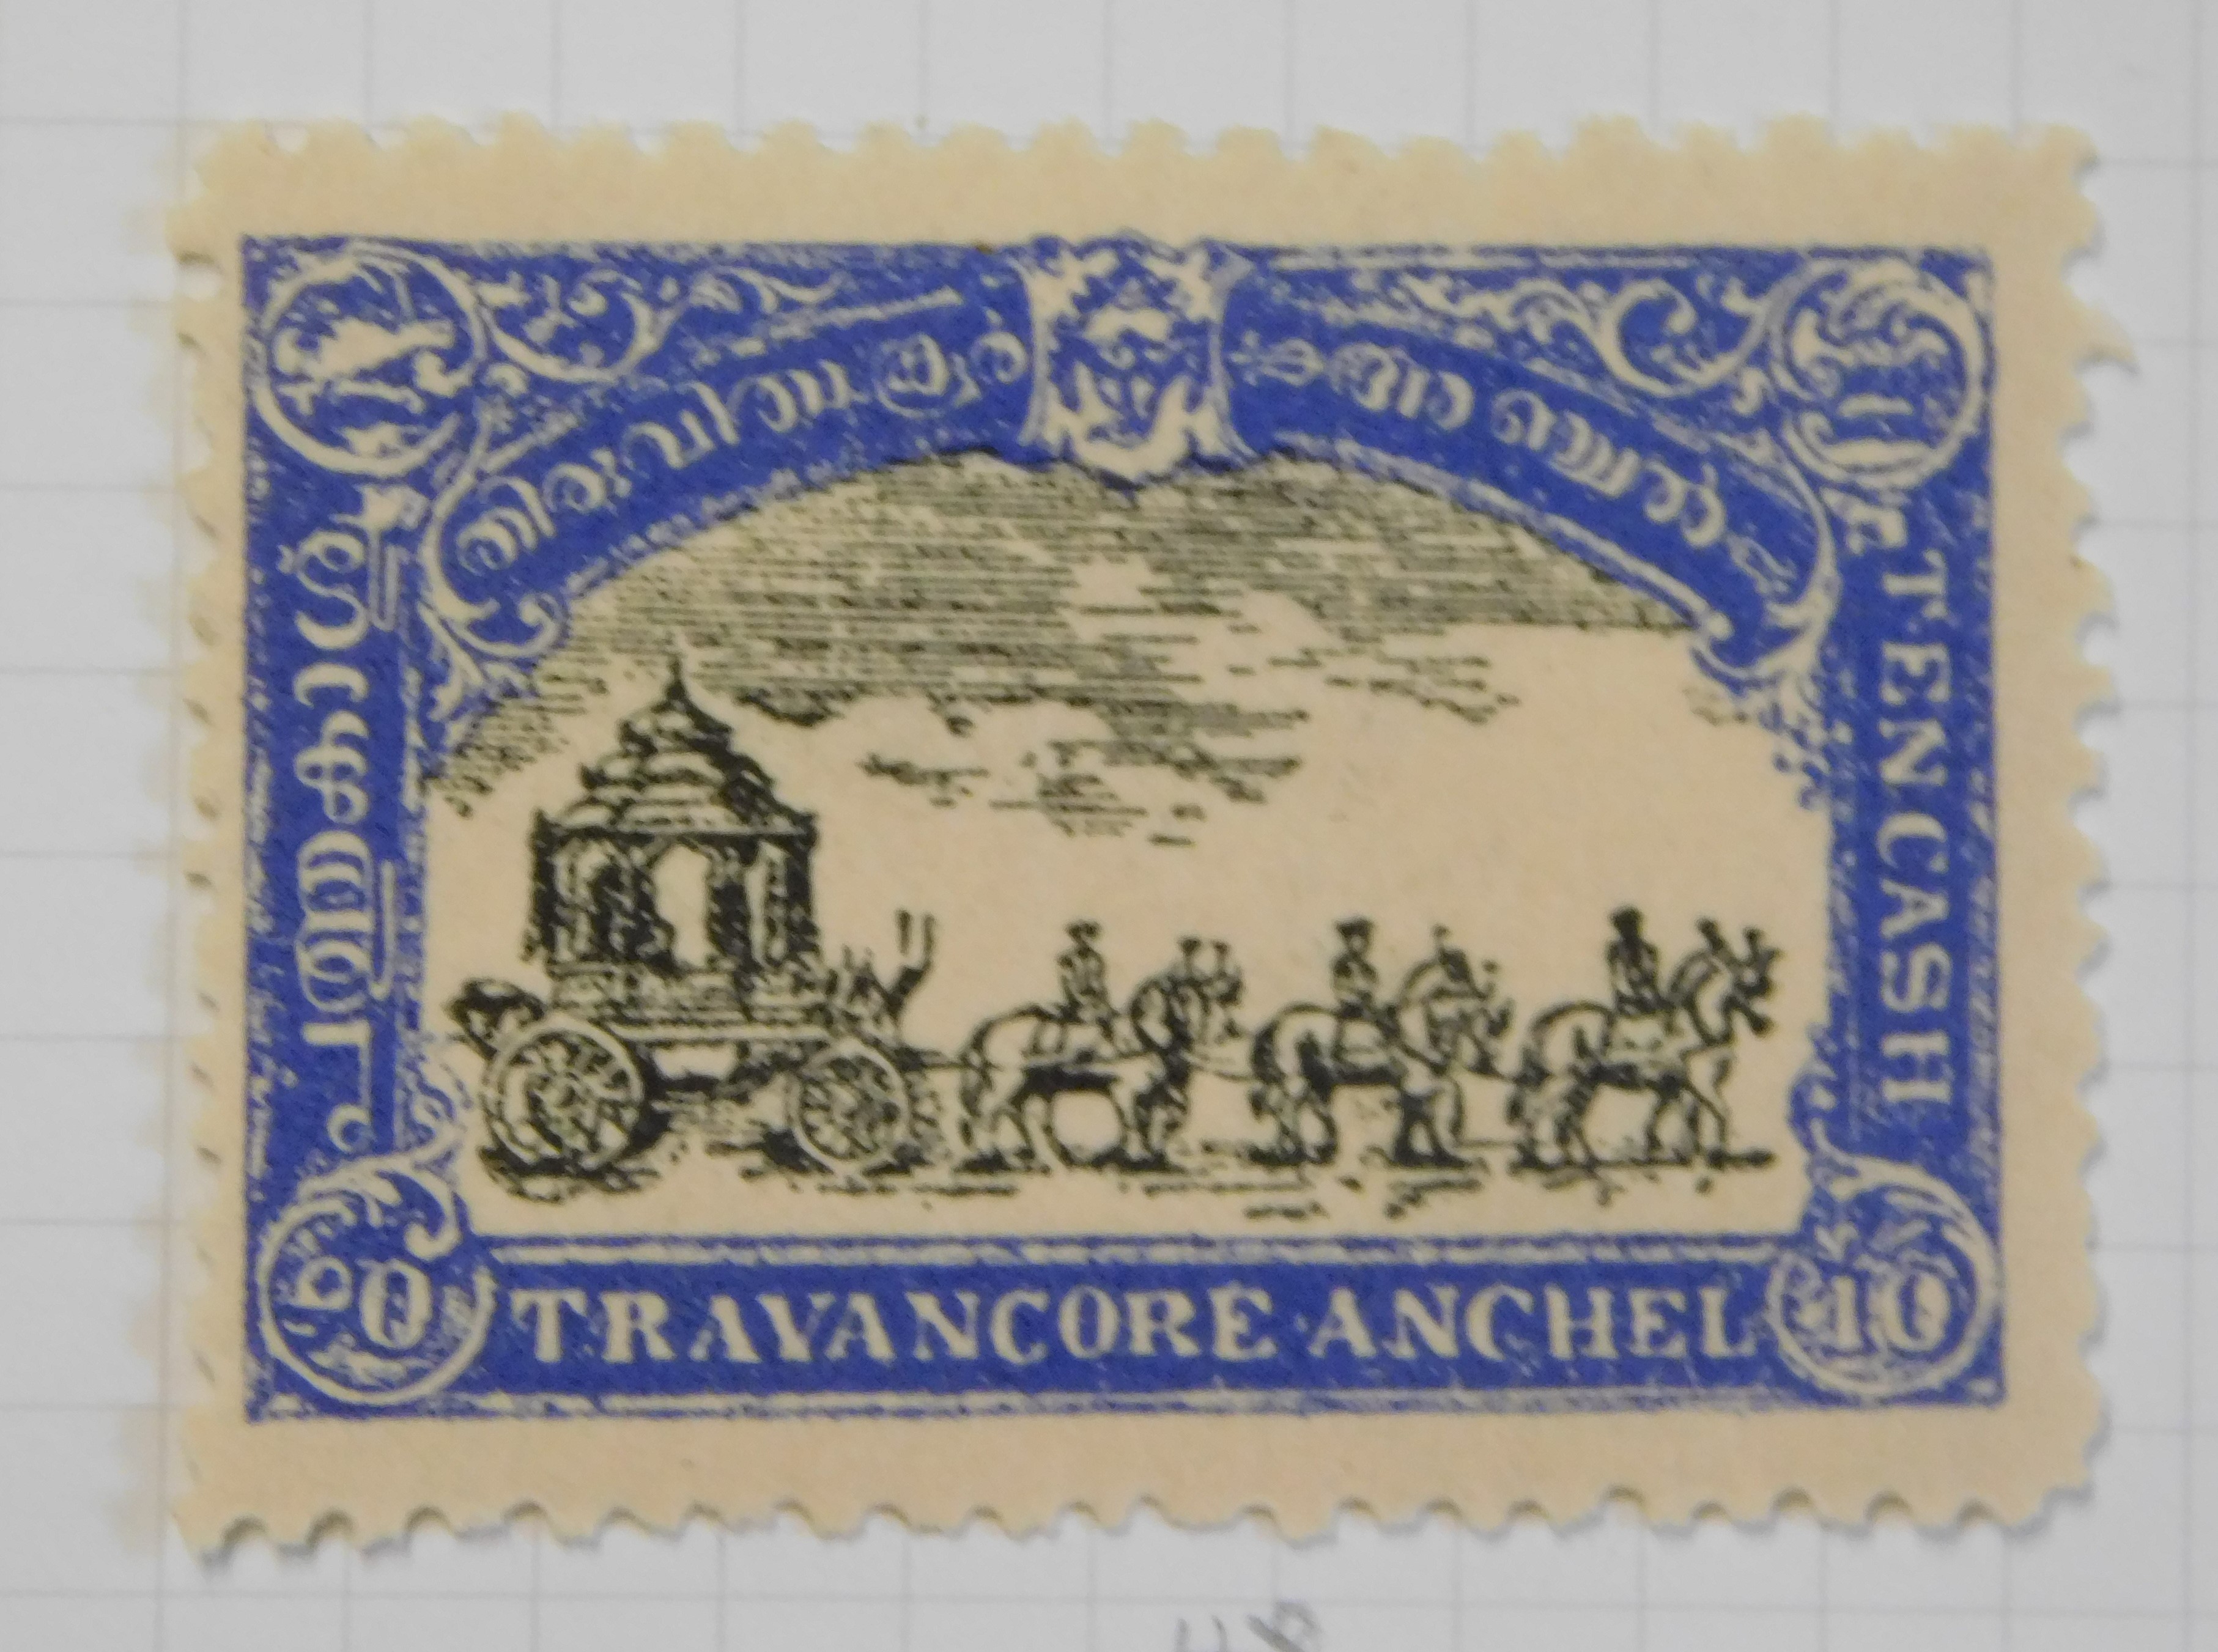 India (Travancore) 1931-1932 mint and fine used includes varieties including overprint double and - Image 2 of 5